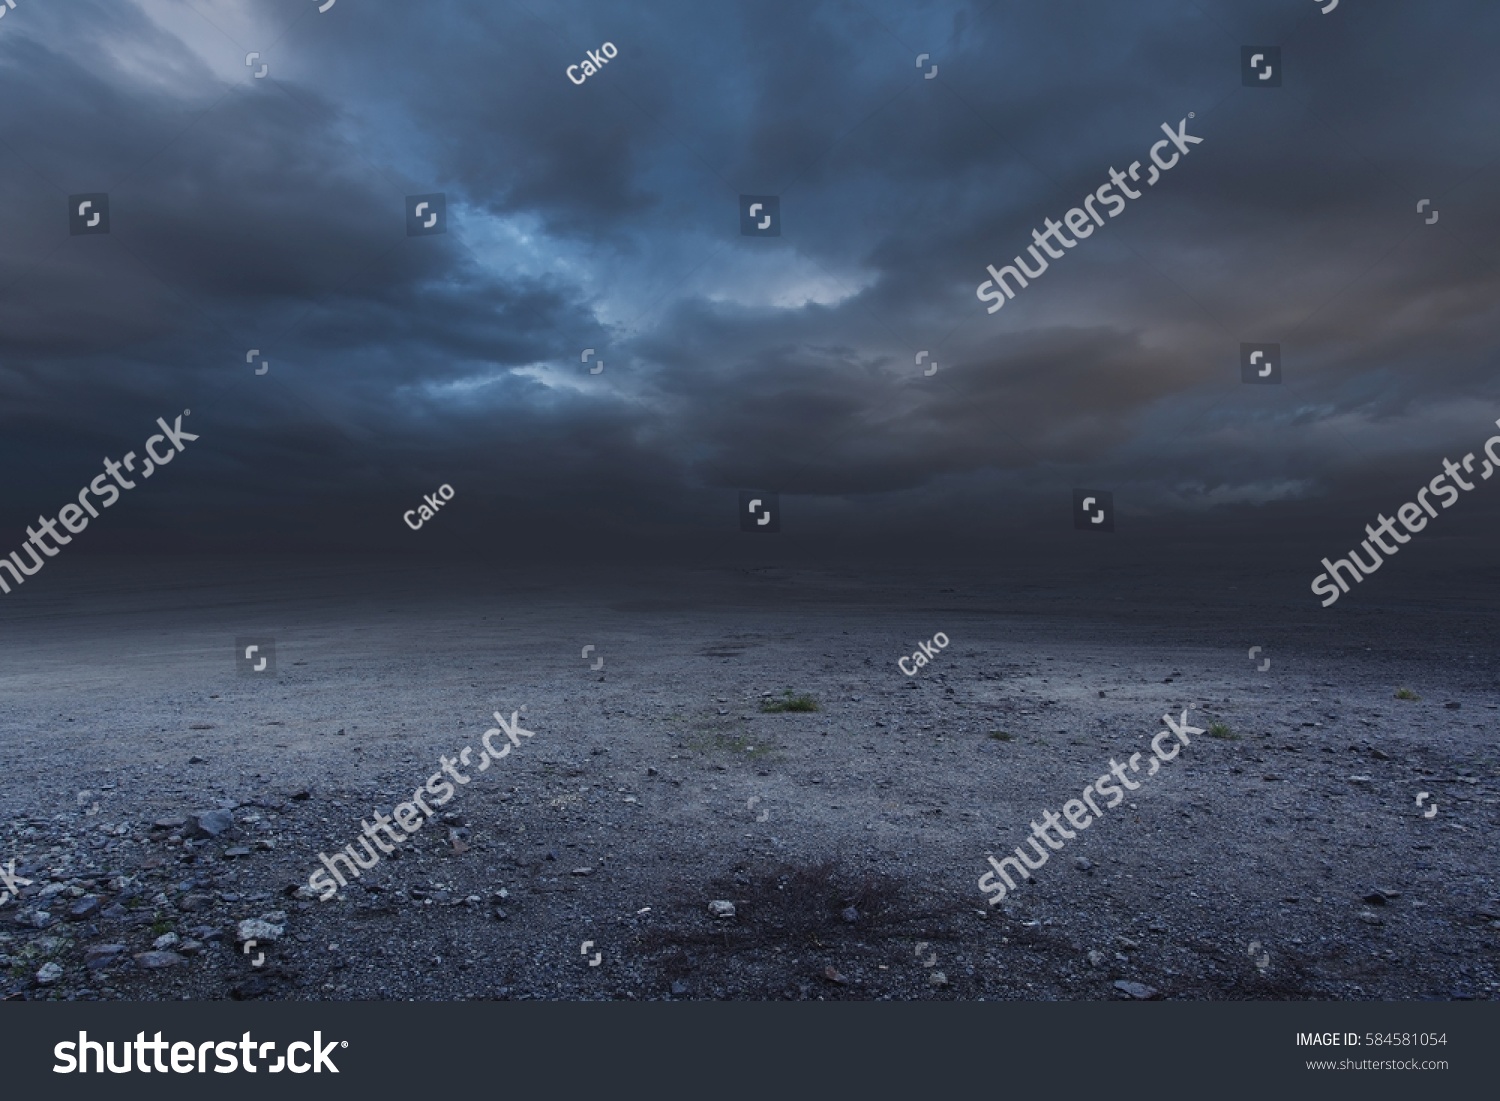 Surreal gravel dark background with dramatic sky #584581054